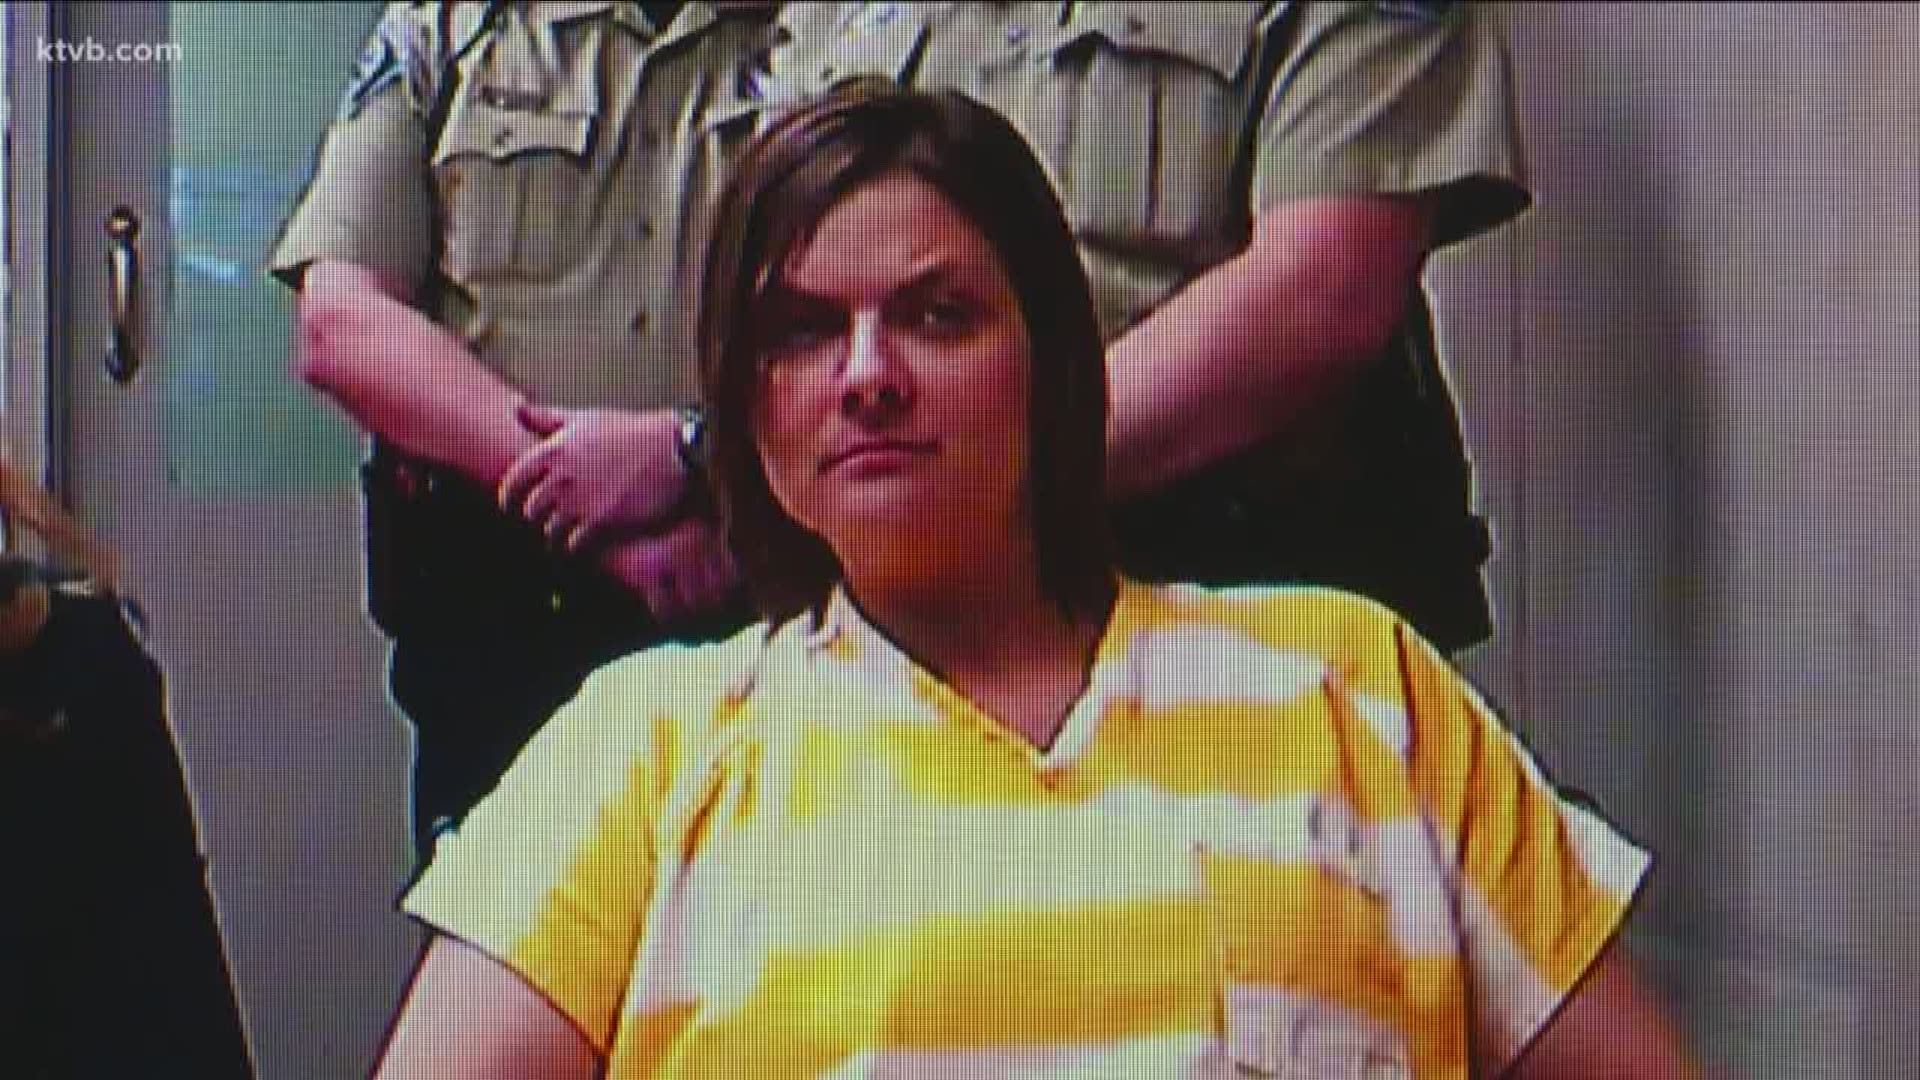 Kimberly Swa made her first court appearance Monday.